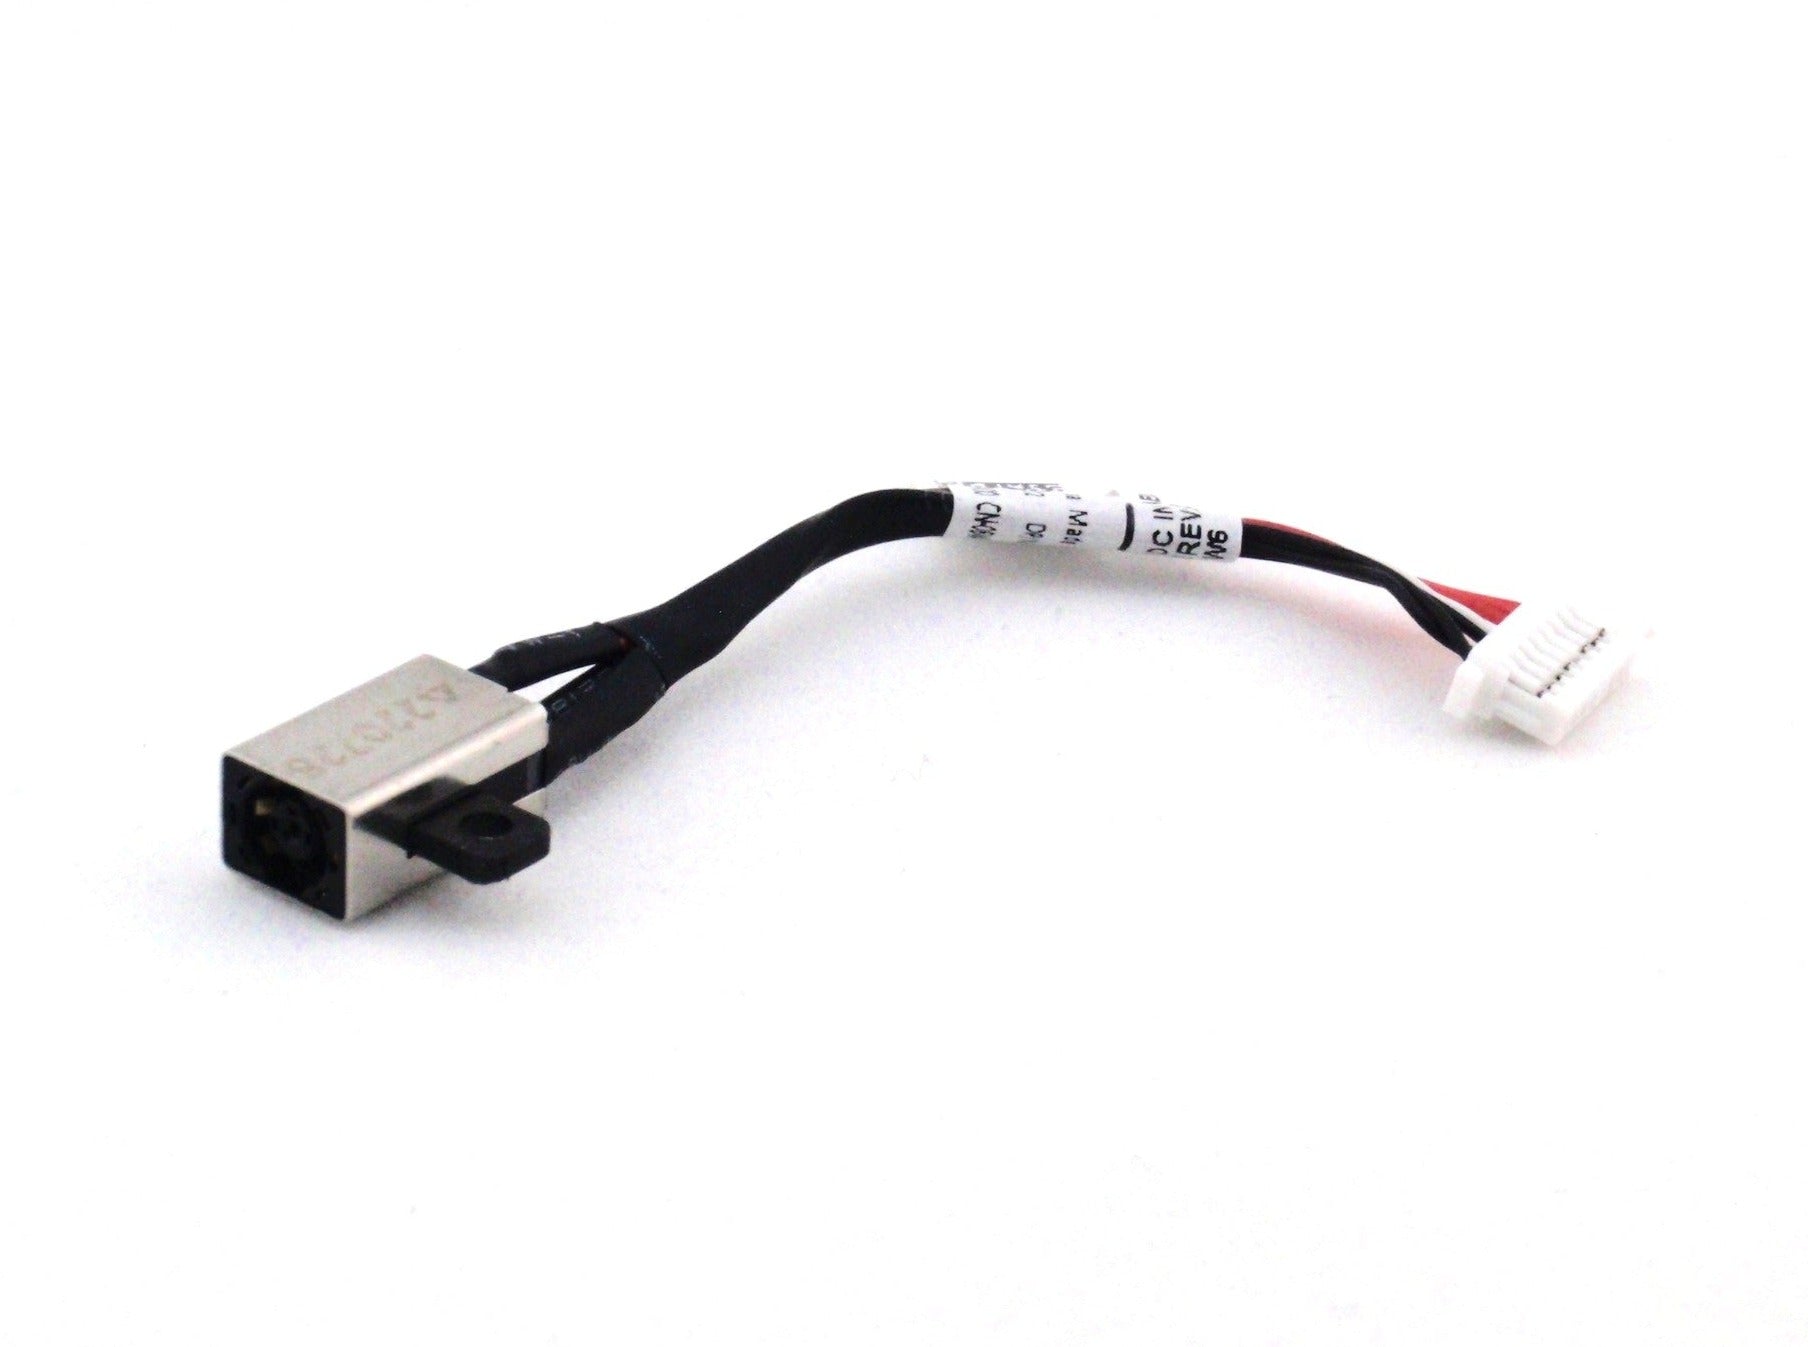 Dell New DC In Power Jack Charging Port Connector Cable Inspiron 17 7000 7773 7778 7779 06VV22 450.08504.0011 6VV22